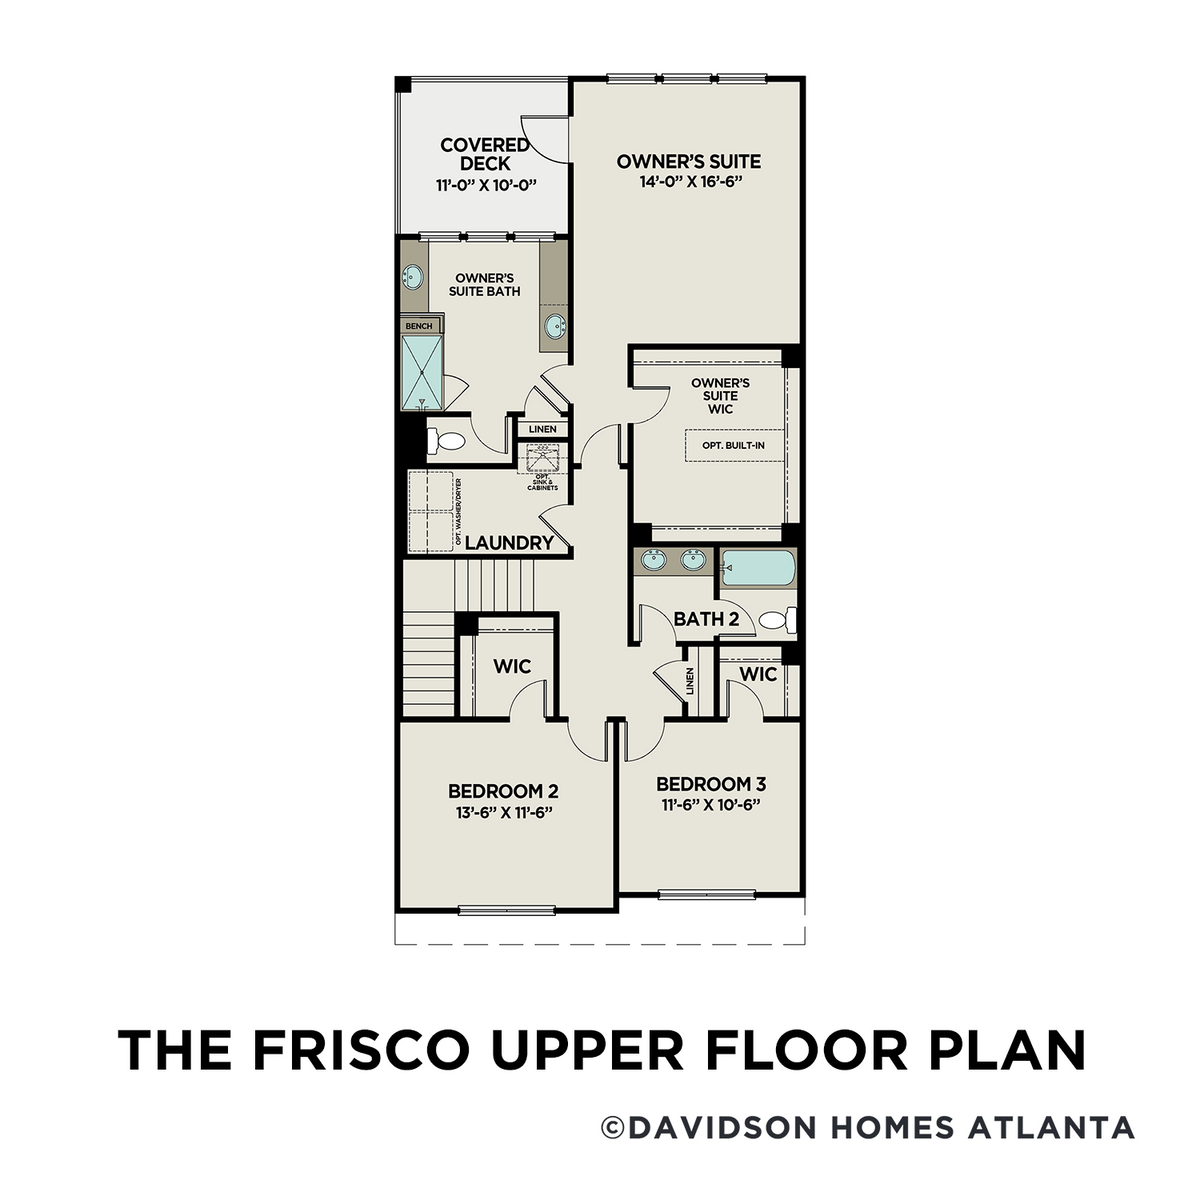 2 - The Frisco A buildable floor plan layout in Davidson Homes' The Village at Towne Lake community.